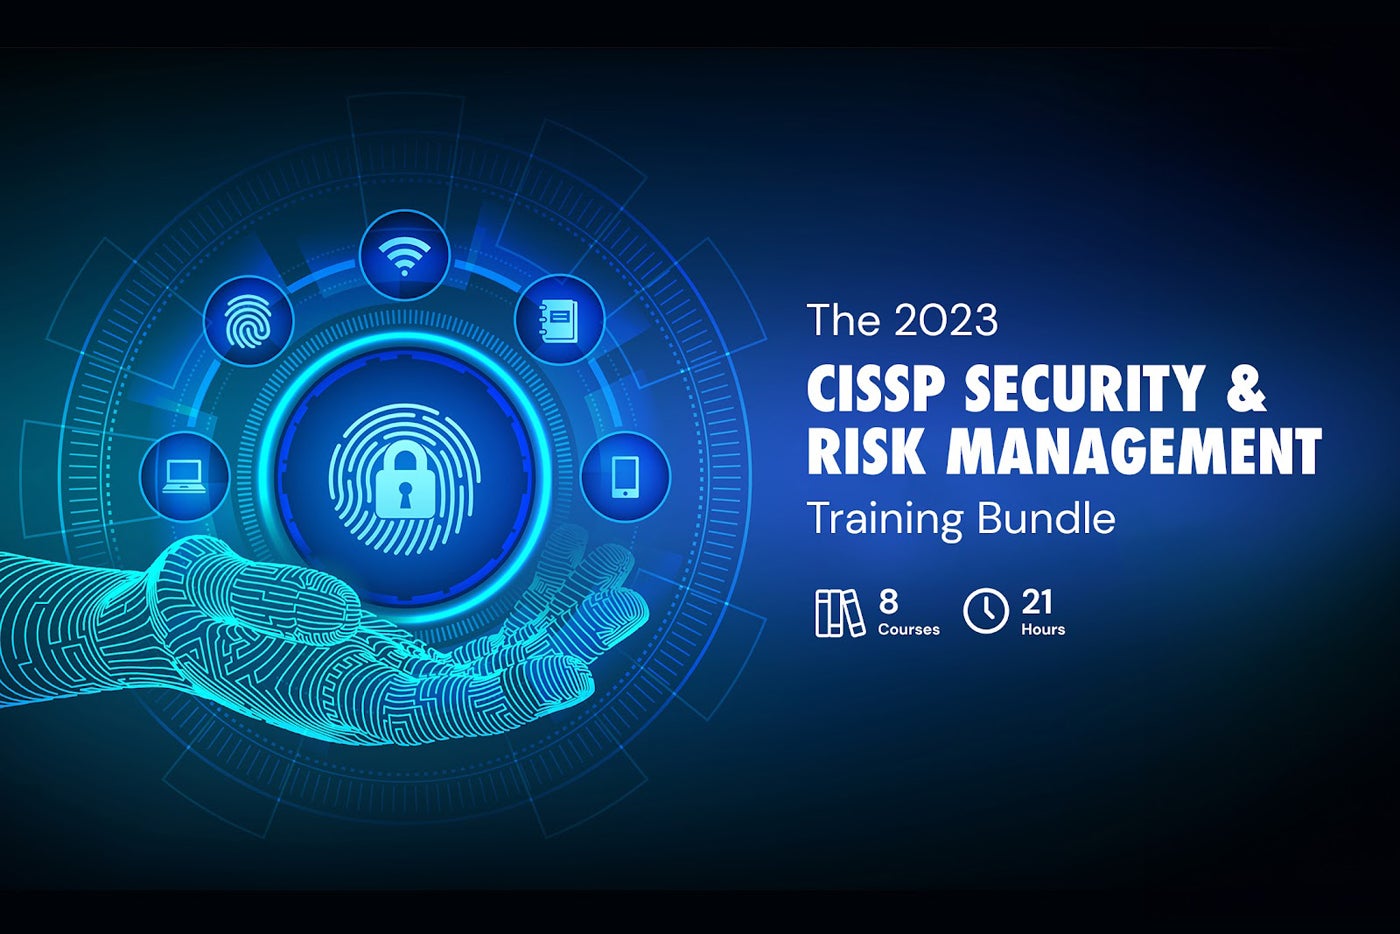 Develop Valuable Security and Risk Management Skills for Just $30 Through 1/1